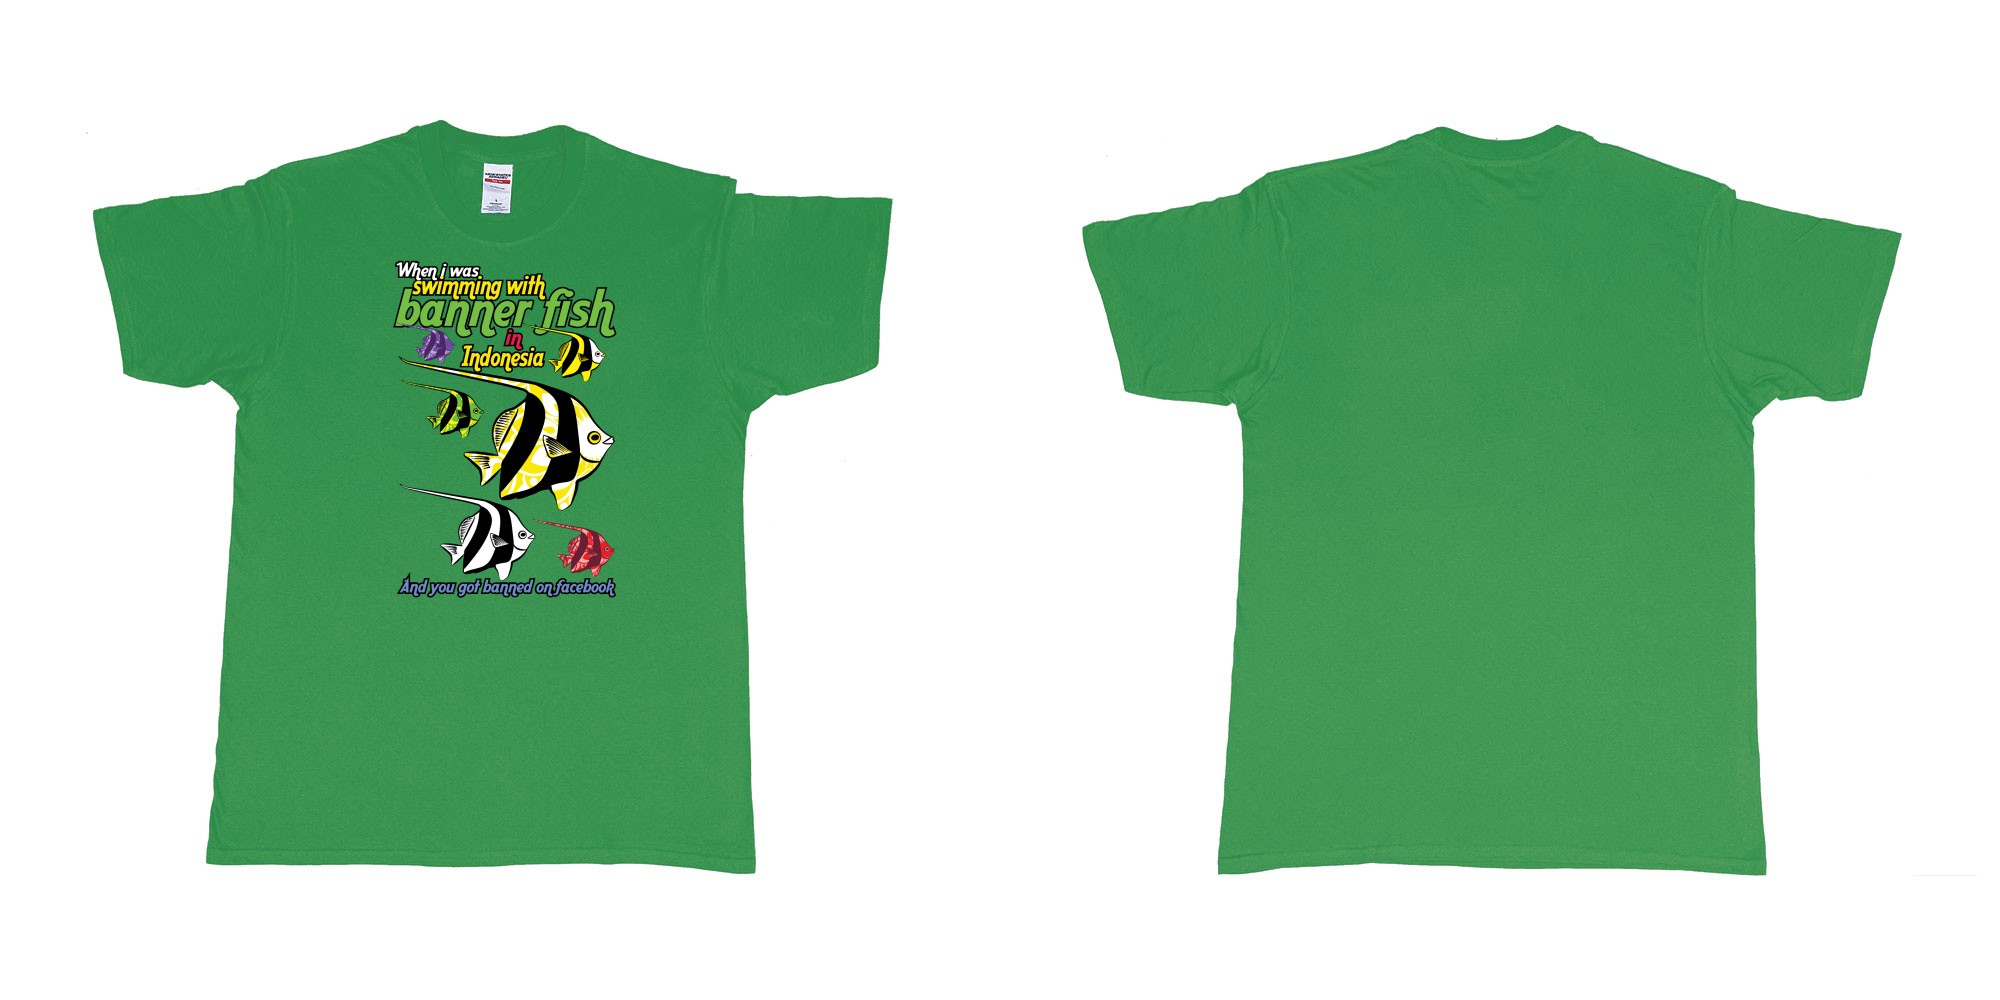 Custom tshirt design when i was swimming with banner fish in indonesia and you got banned from facebook in fabric color irish-green choice your own text made in Bali by The Pirate Way